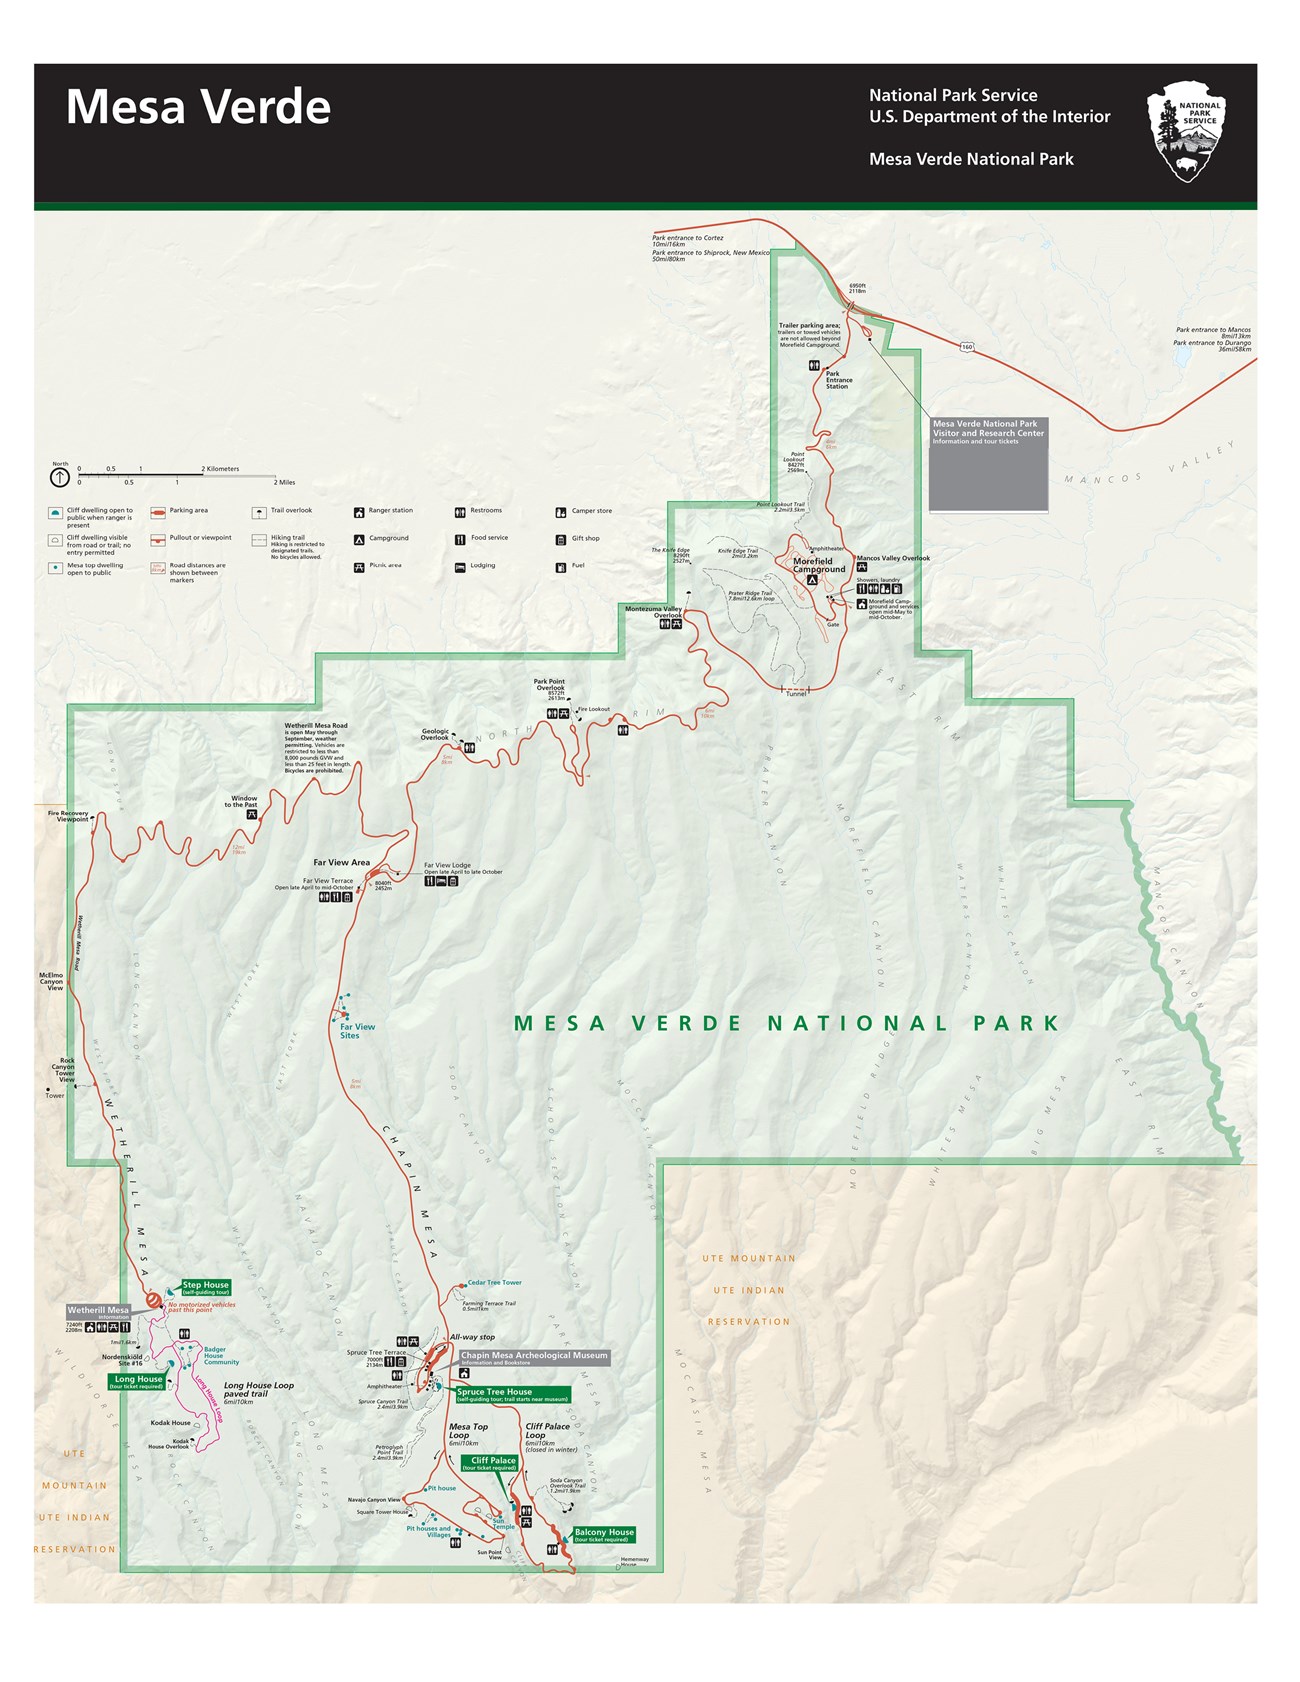 Park map displays 20 mile main park road into Chapin Mesa and Wetherill Mesa. Points of interest such as the Visitor Center and Lodging and campground are marked on the map as are the driving loops and historic district.